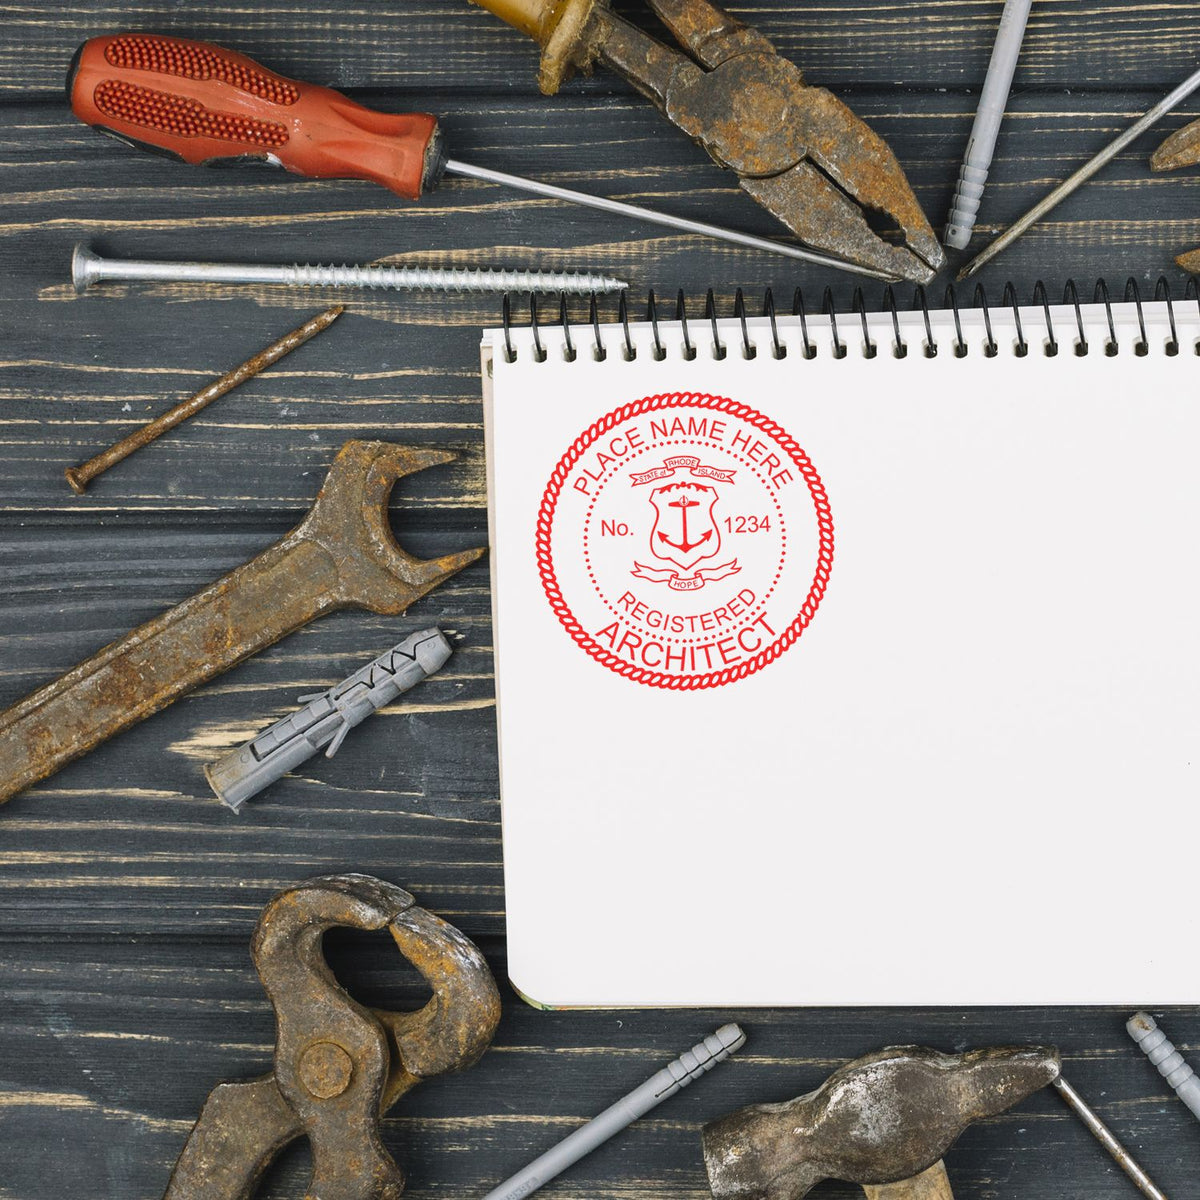 The Slim Pre-Inked Rhode Island Architect Seal Stamp stamp impression comes to life with a crisp, detailed photo on paper - showcasing true professional quality.